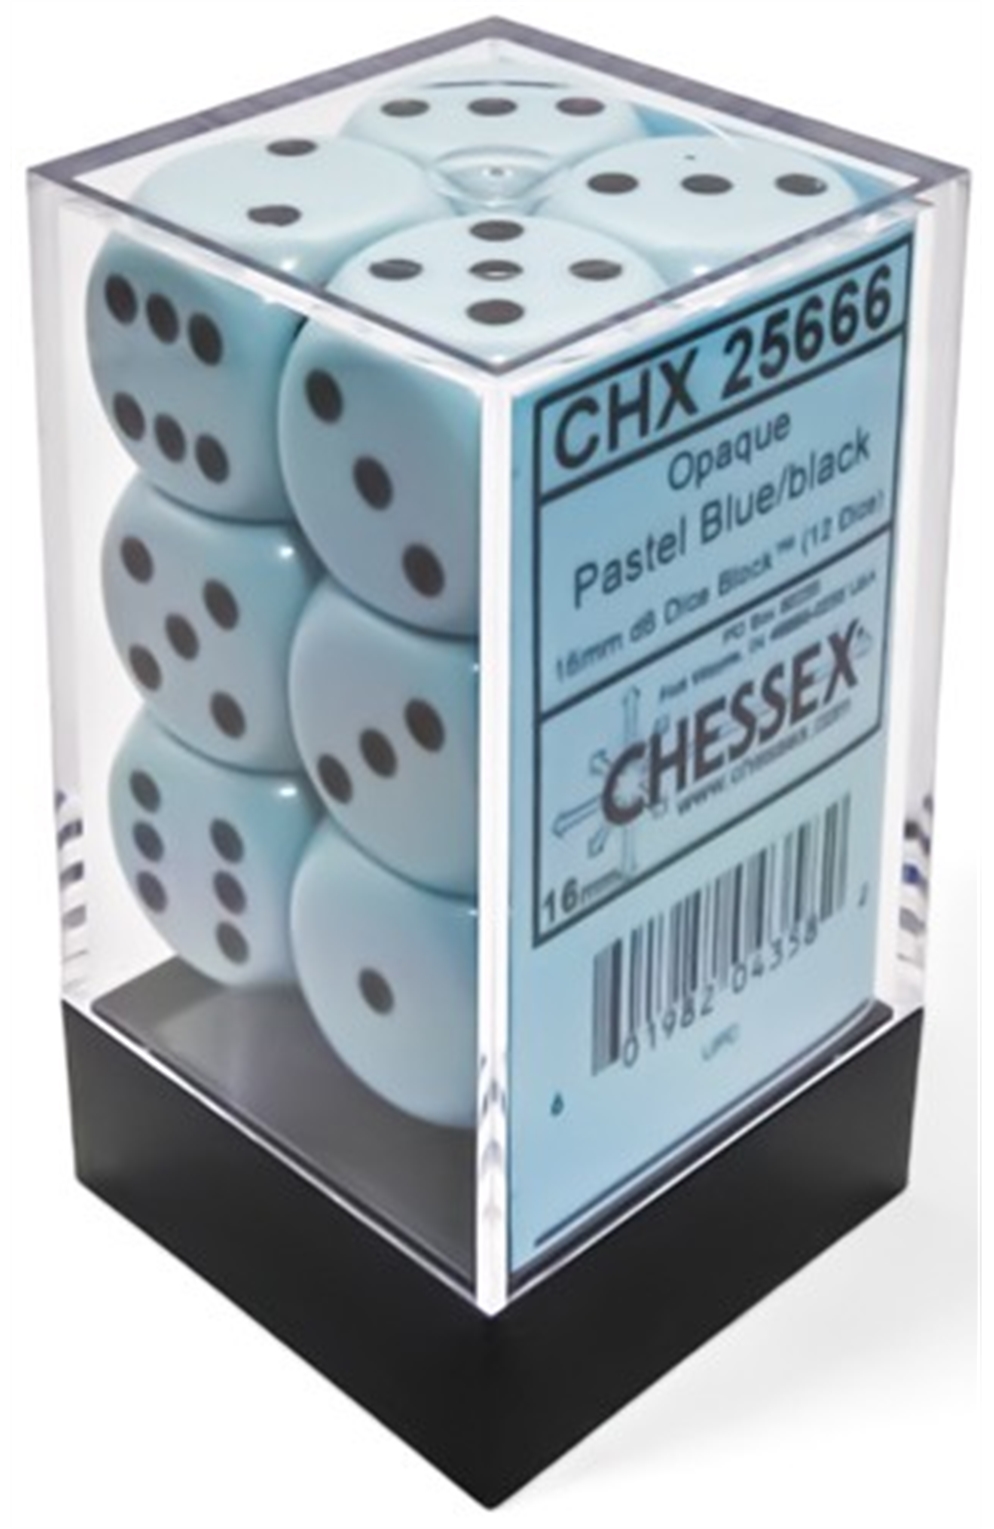 Chessex Dice Opaque Pastel Blue D6 16Mm (12)